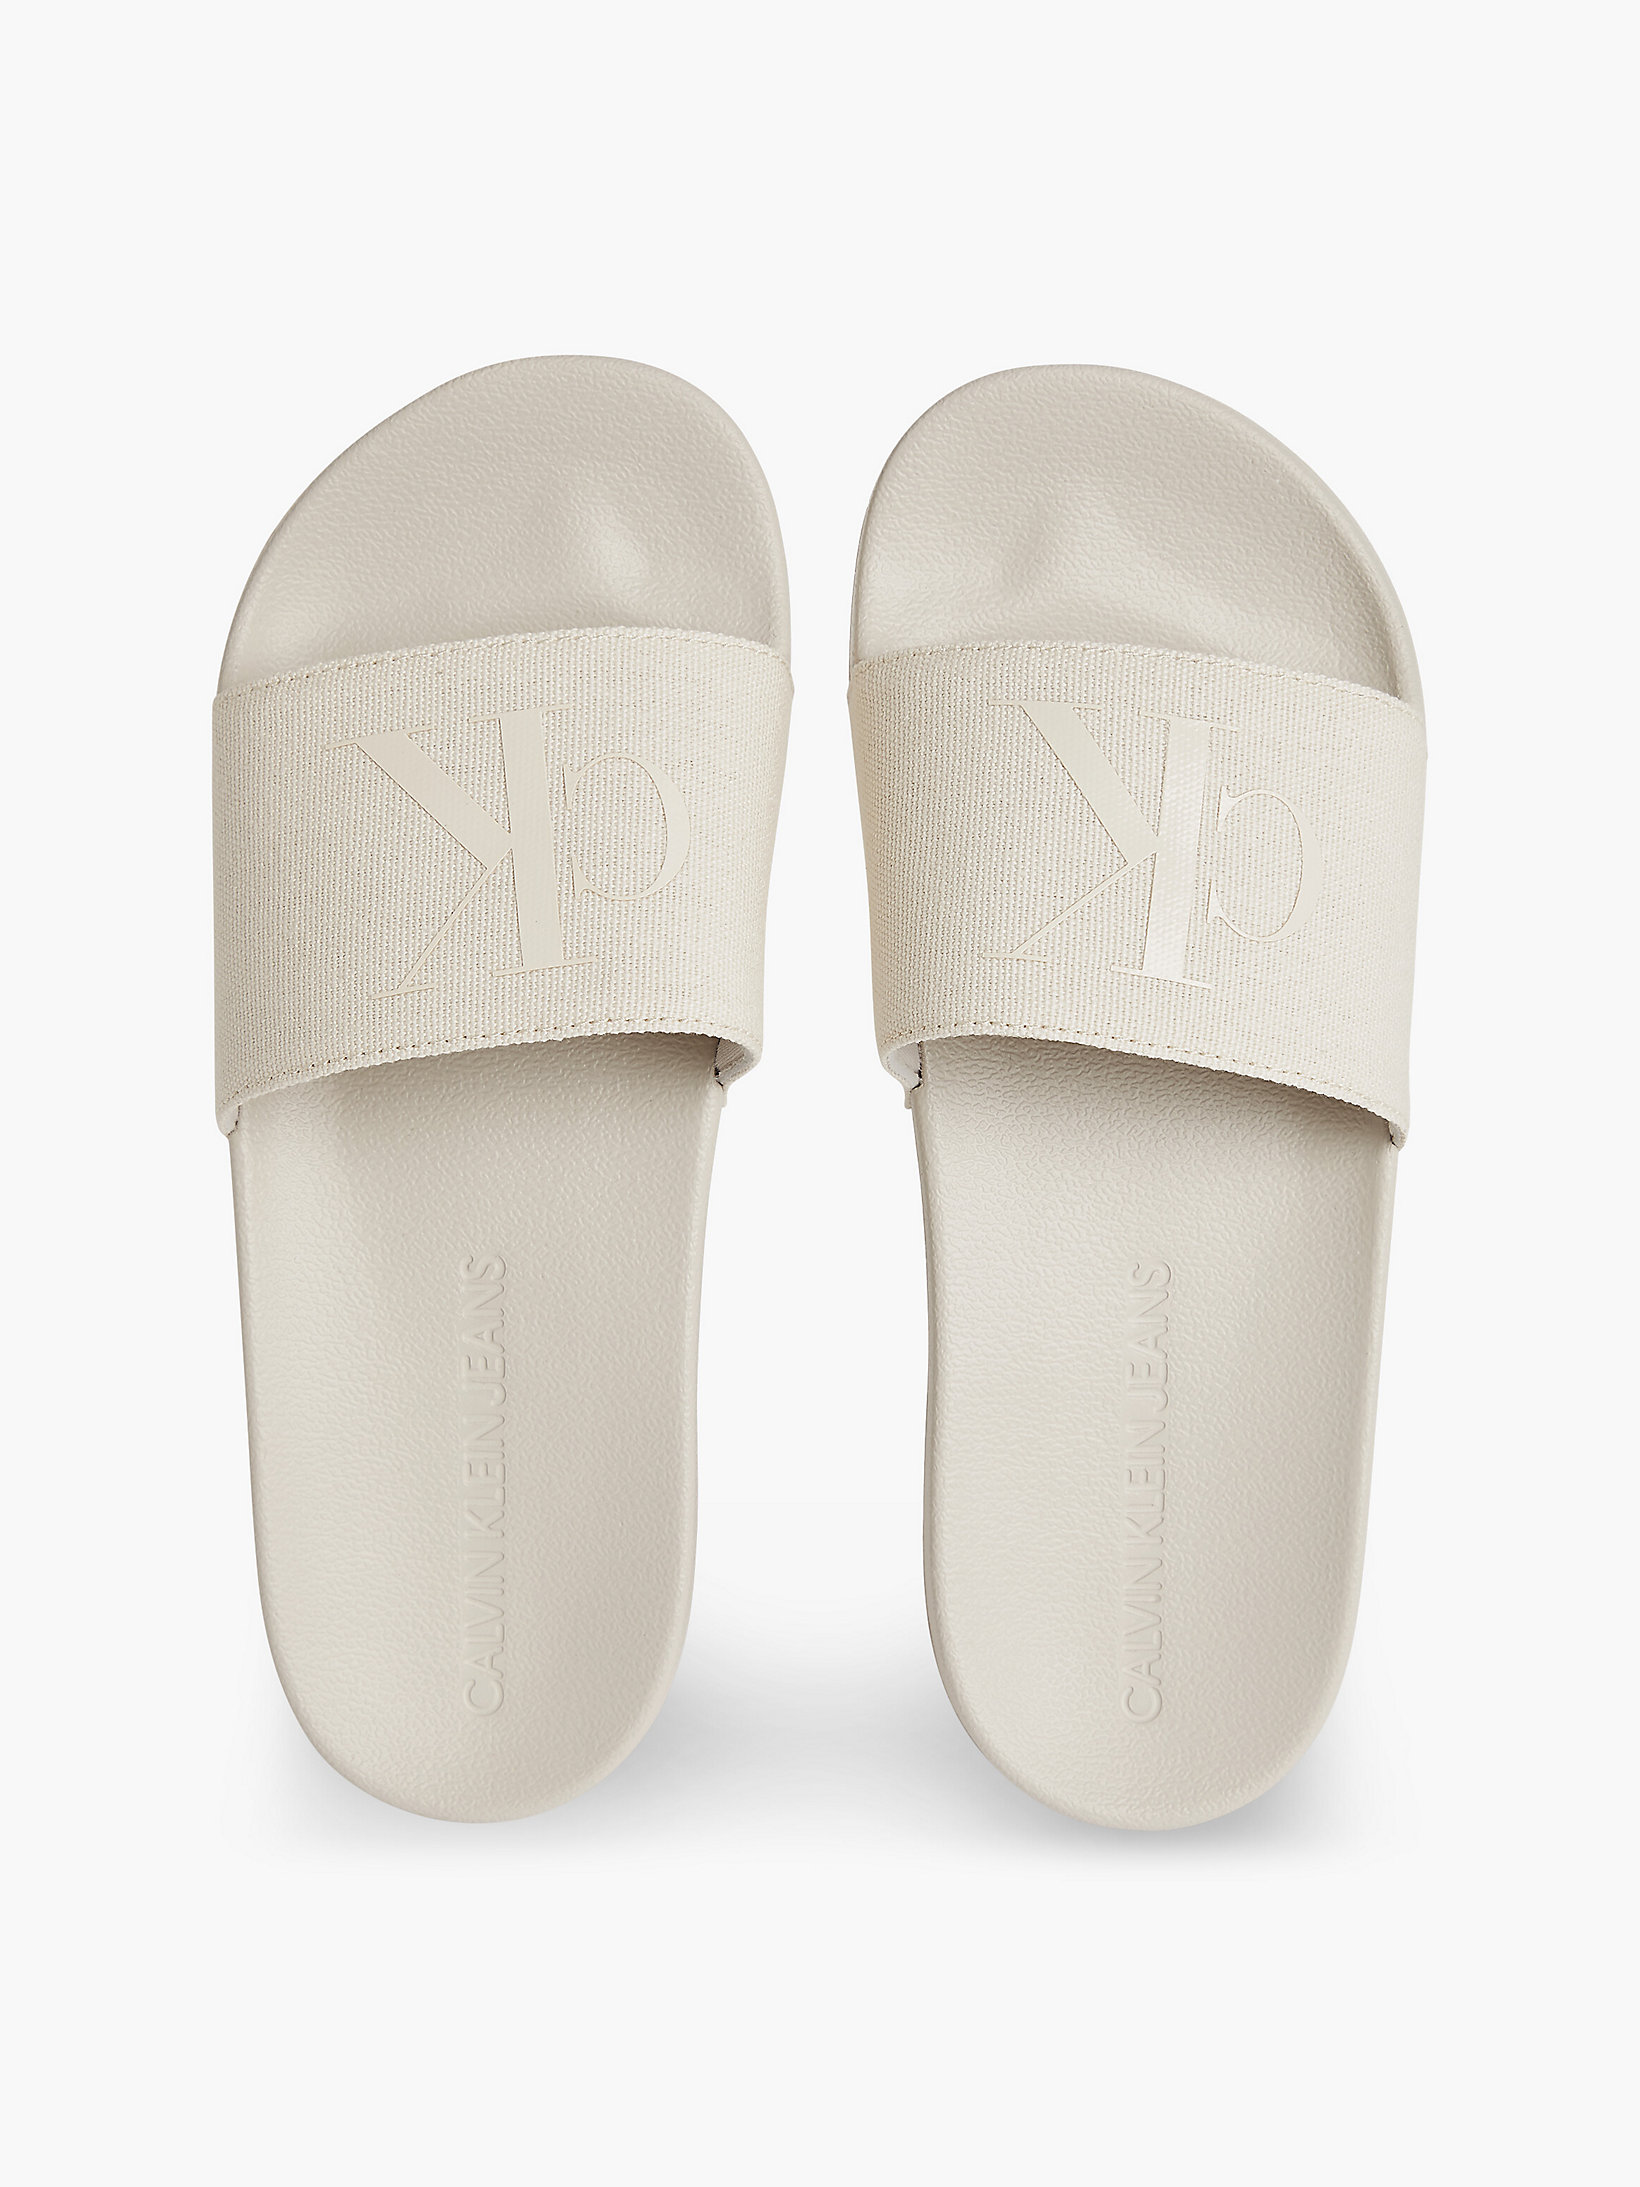 Eggshell Recycled Canvas Sliders undefined women Calvin Klein